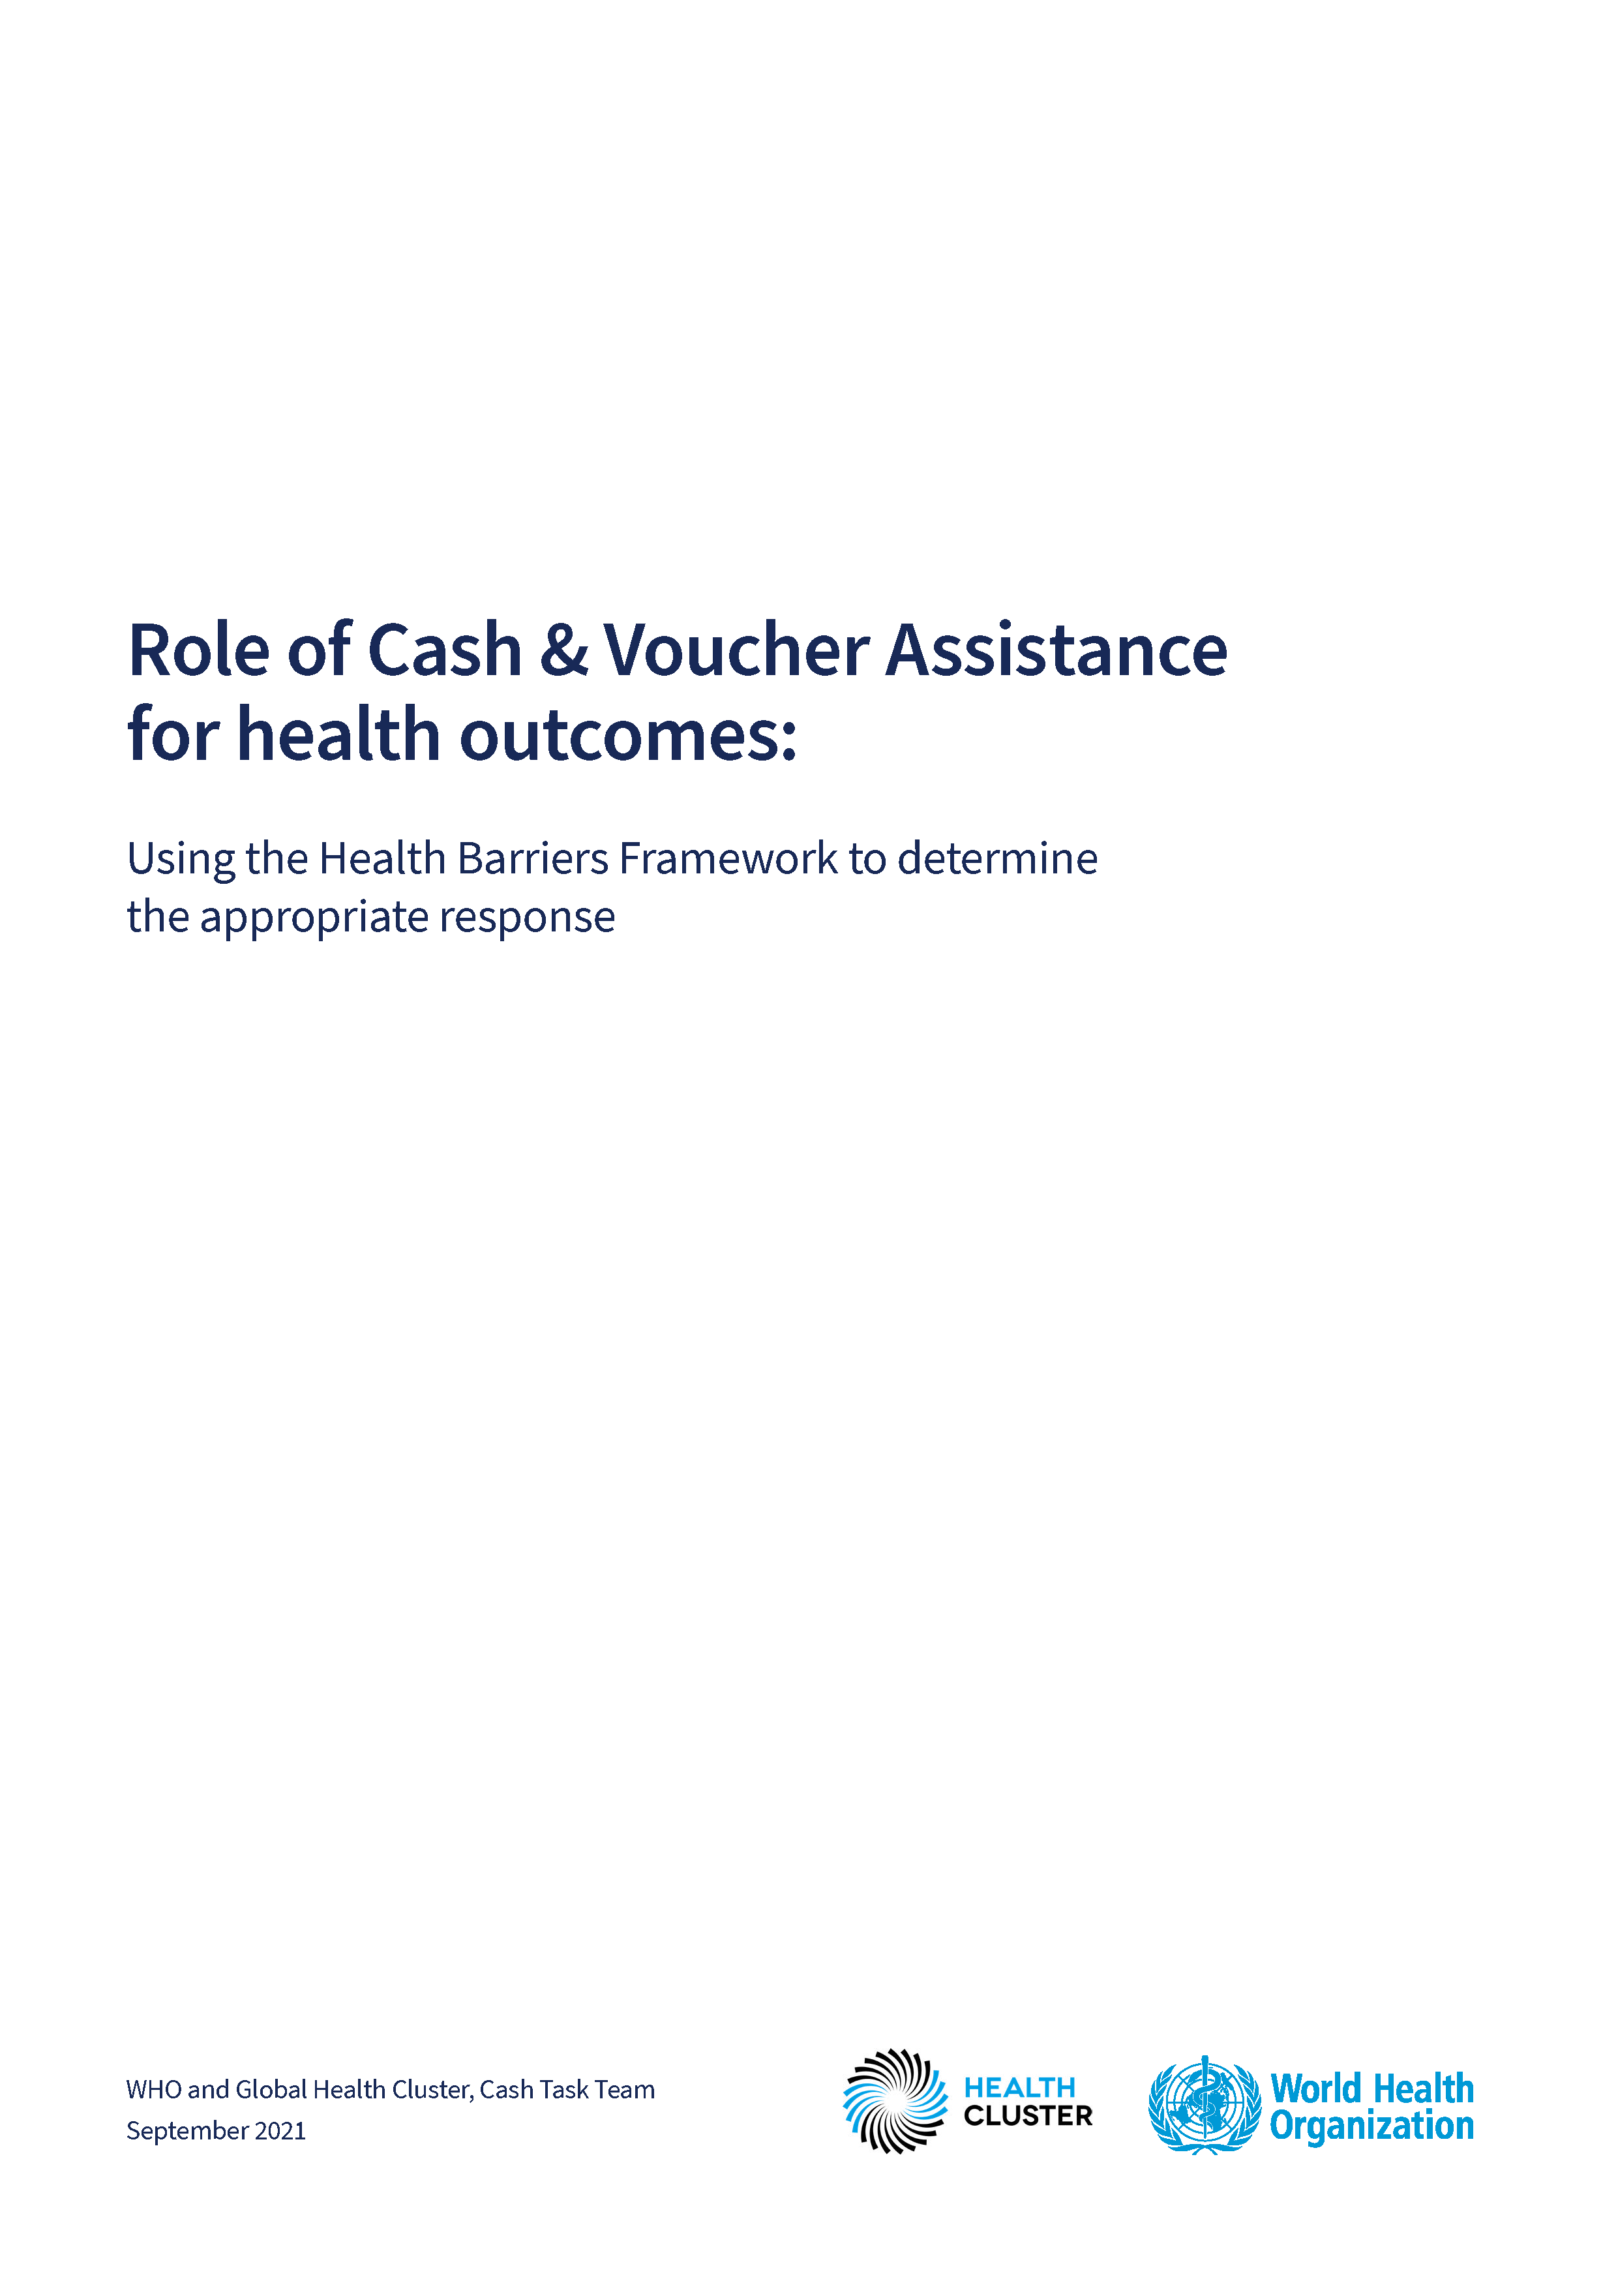 Cover page for Role of Cash & Voucher Assistance for Health Outcomes